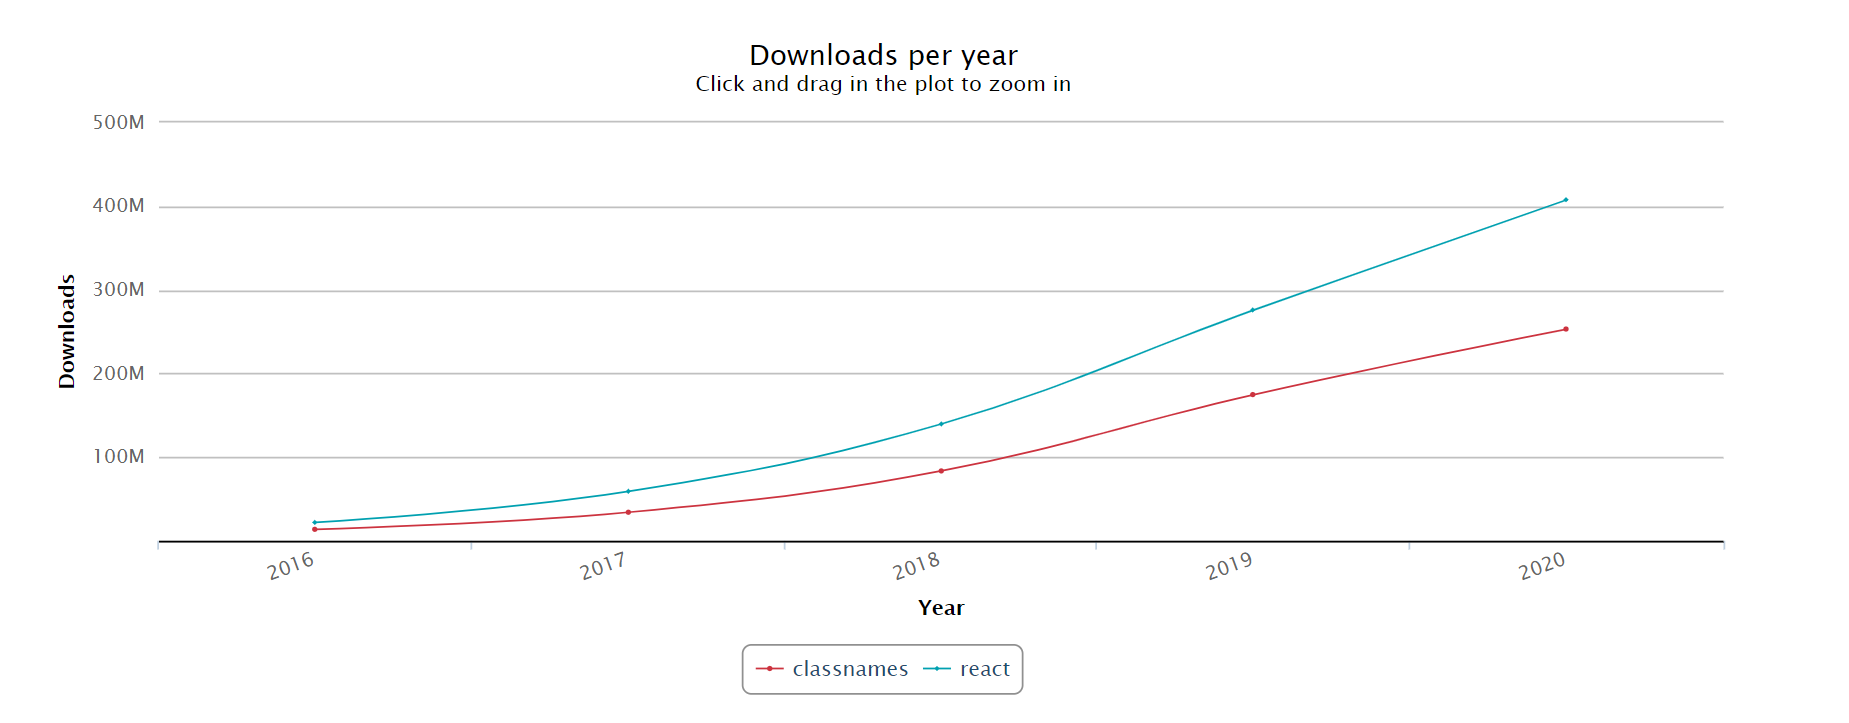 classNames and React popularity growth